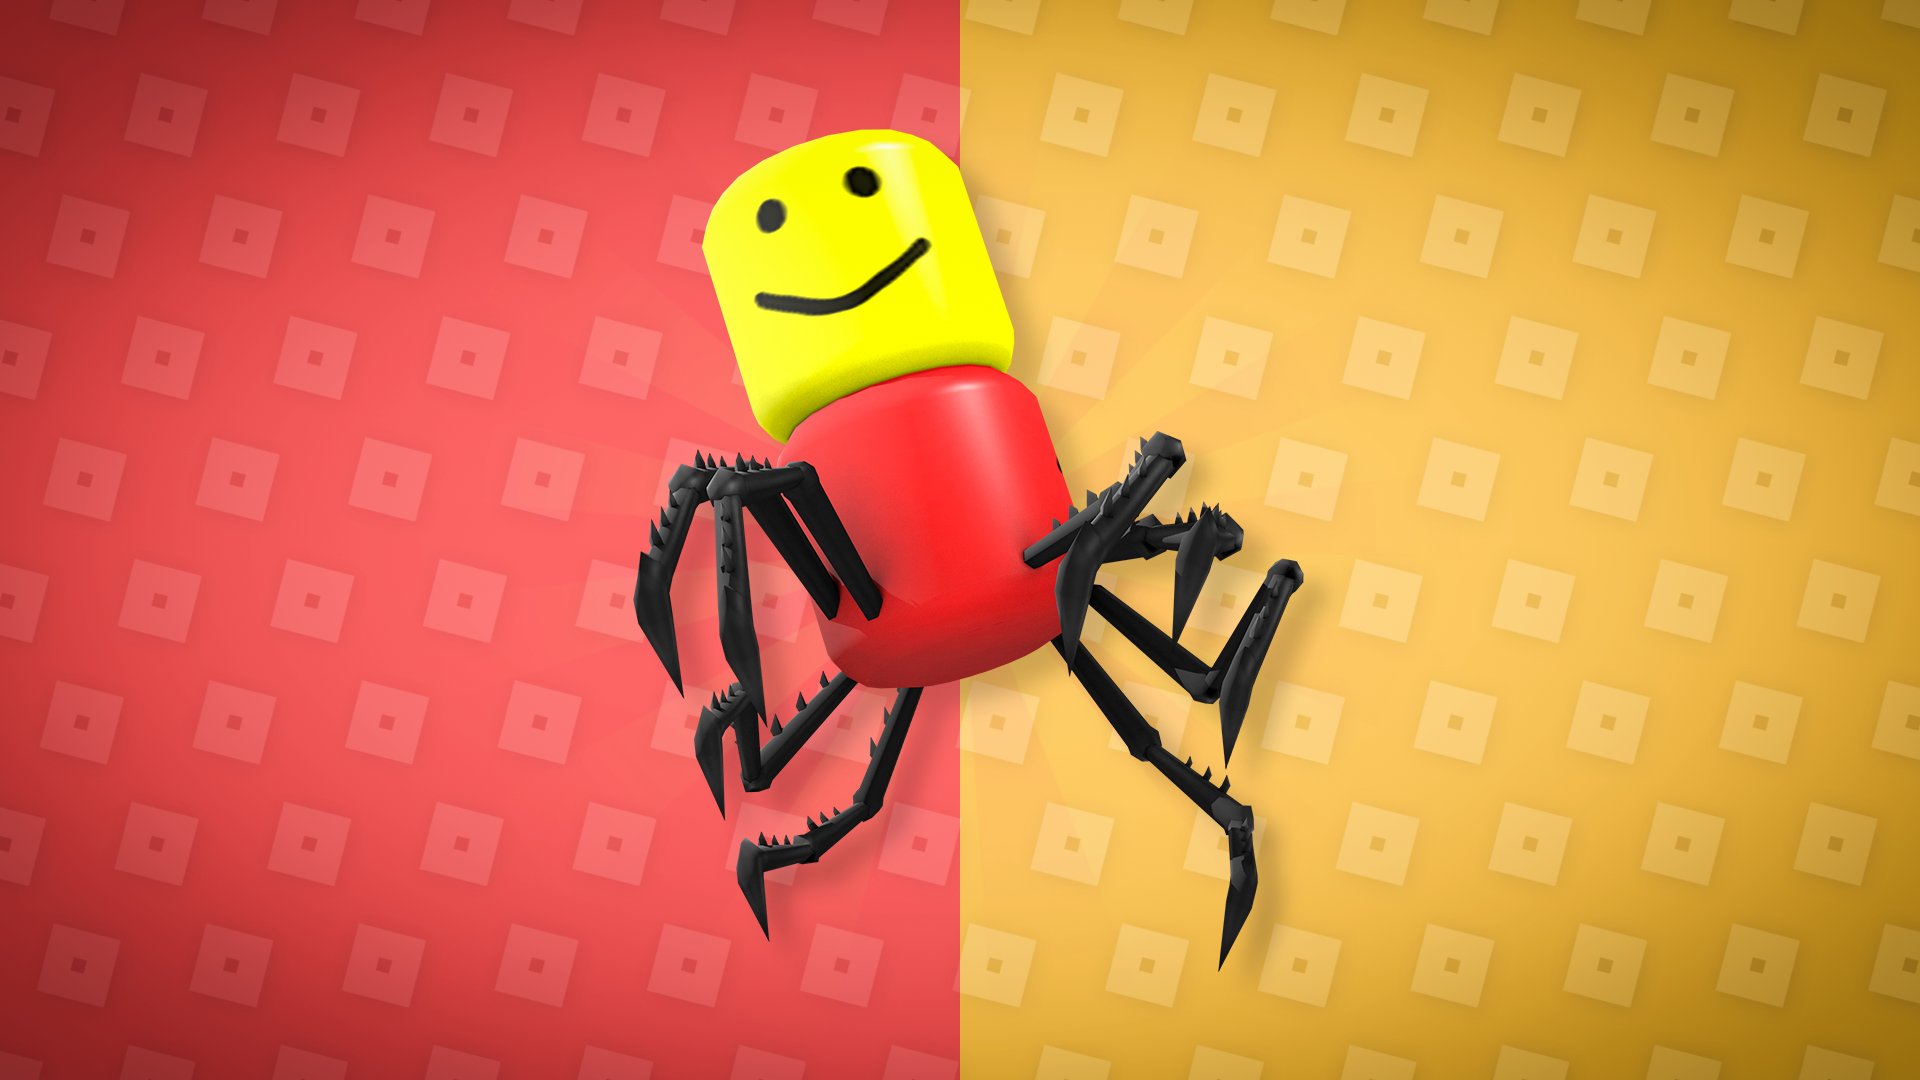 Rbxnews On Twitter Soon When You Purchase Roblox Gift Cards Directly From The Official Site You May Receive The Hanging Despacito Spider Through A Bonus Code Official Site Https T Co Vmbd6lbqjx Hanging Despacito Spider - roblox gift card background